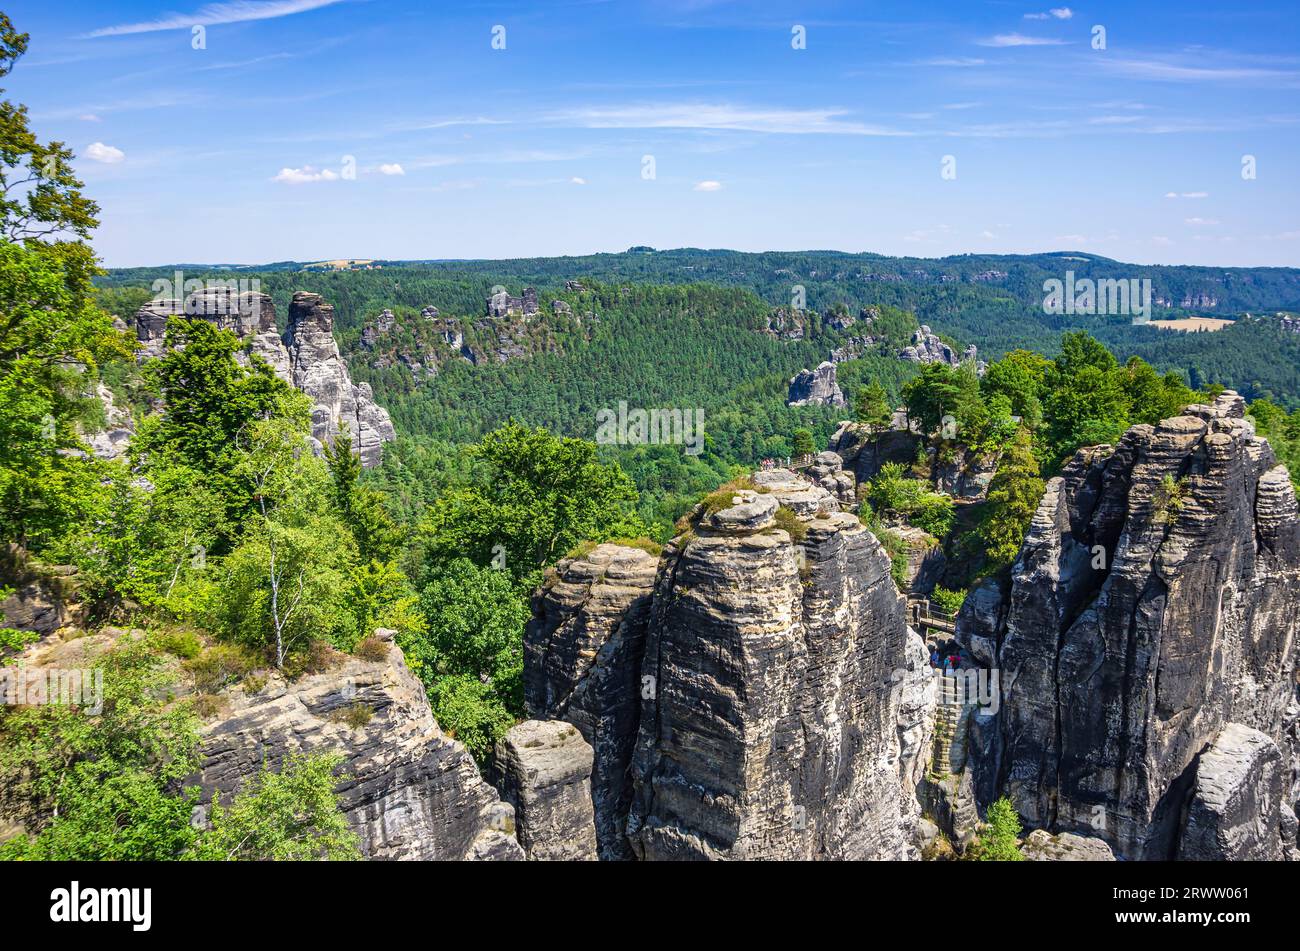 Picturesque view from the Bastei rock formation of the surrounding cliffs of the Elbe Sandstone Mountains, Saxon Switzerland, Saxony, Germany. Stock Photo